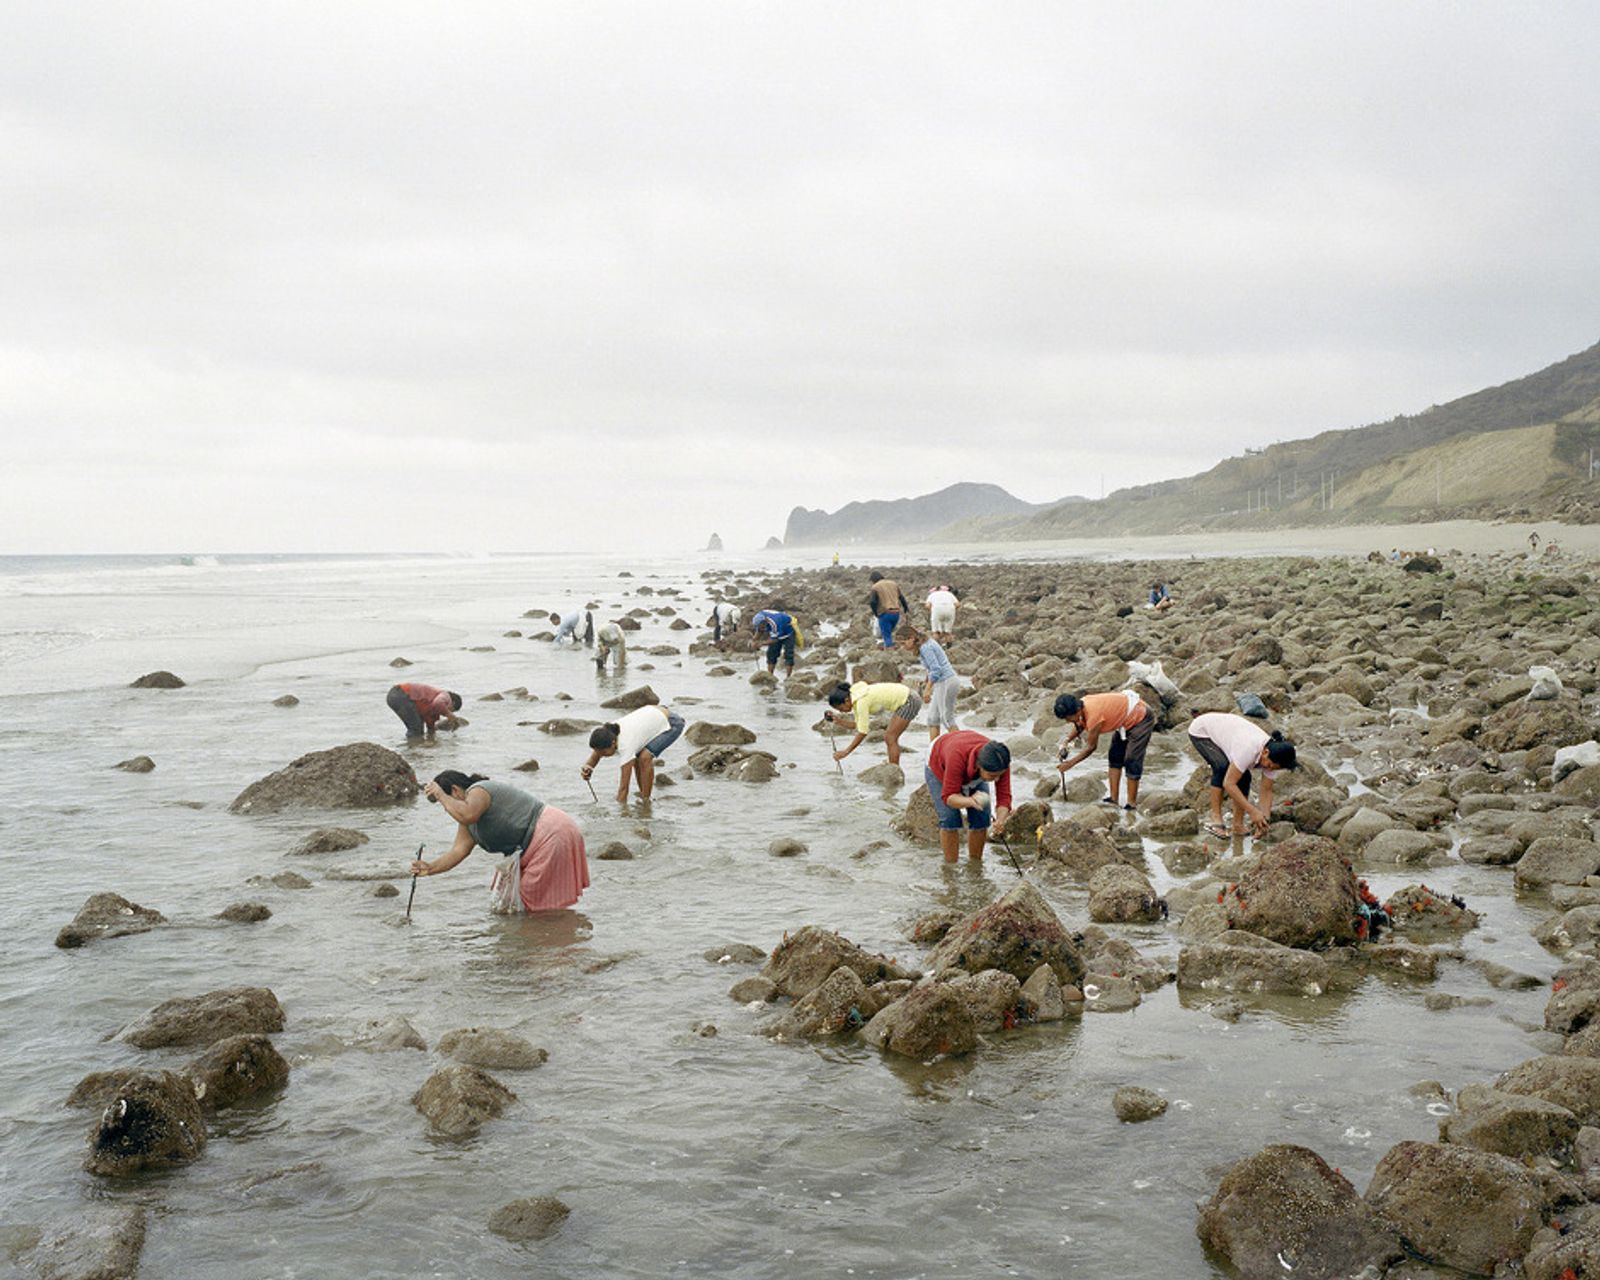 © Pietro Paolini - Collectors of shells in the bay of San Lorenzo, one of the wilder zone of the Ecuadorian coast. October 2012